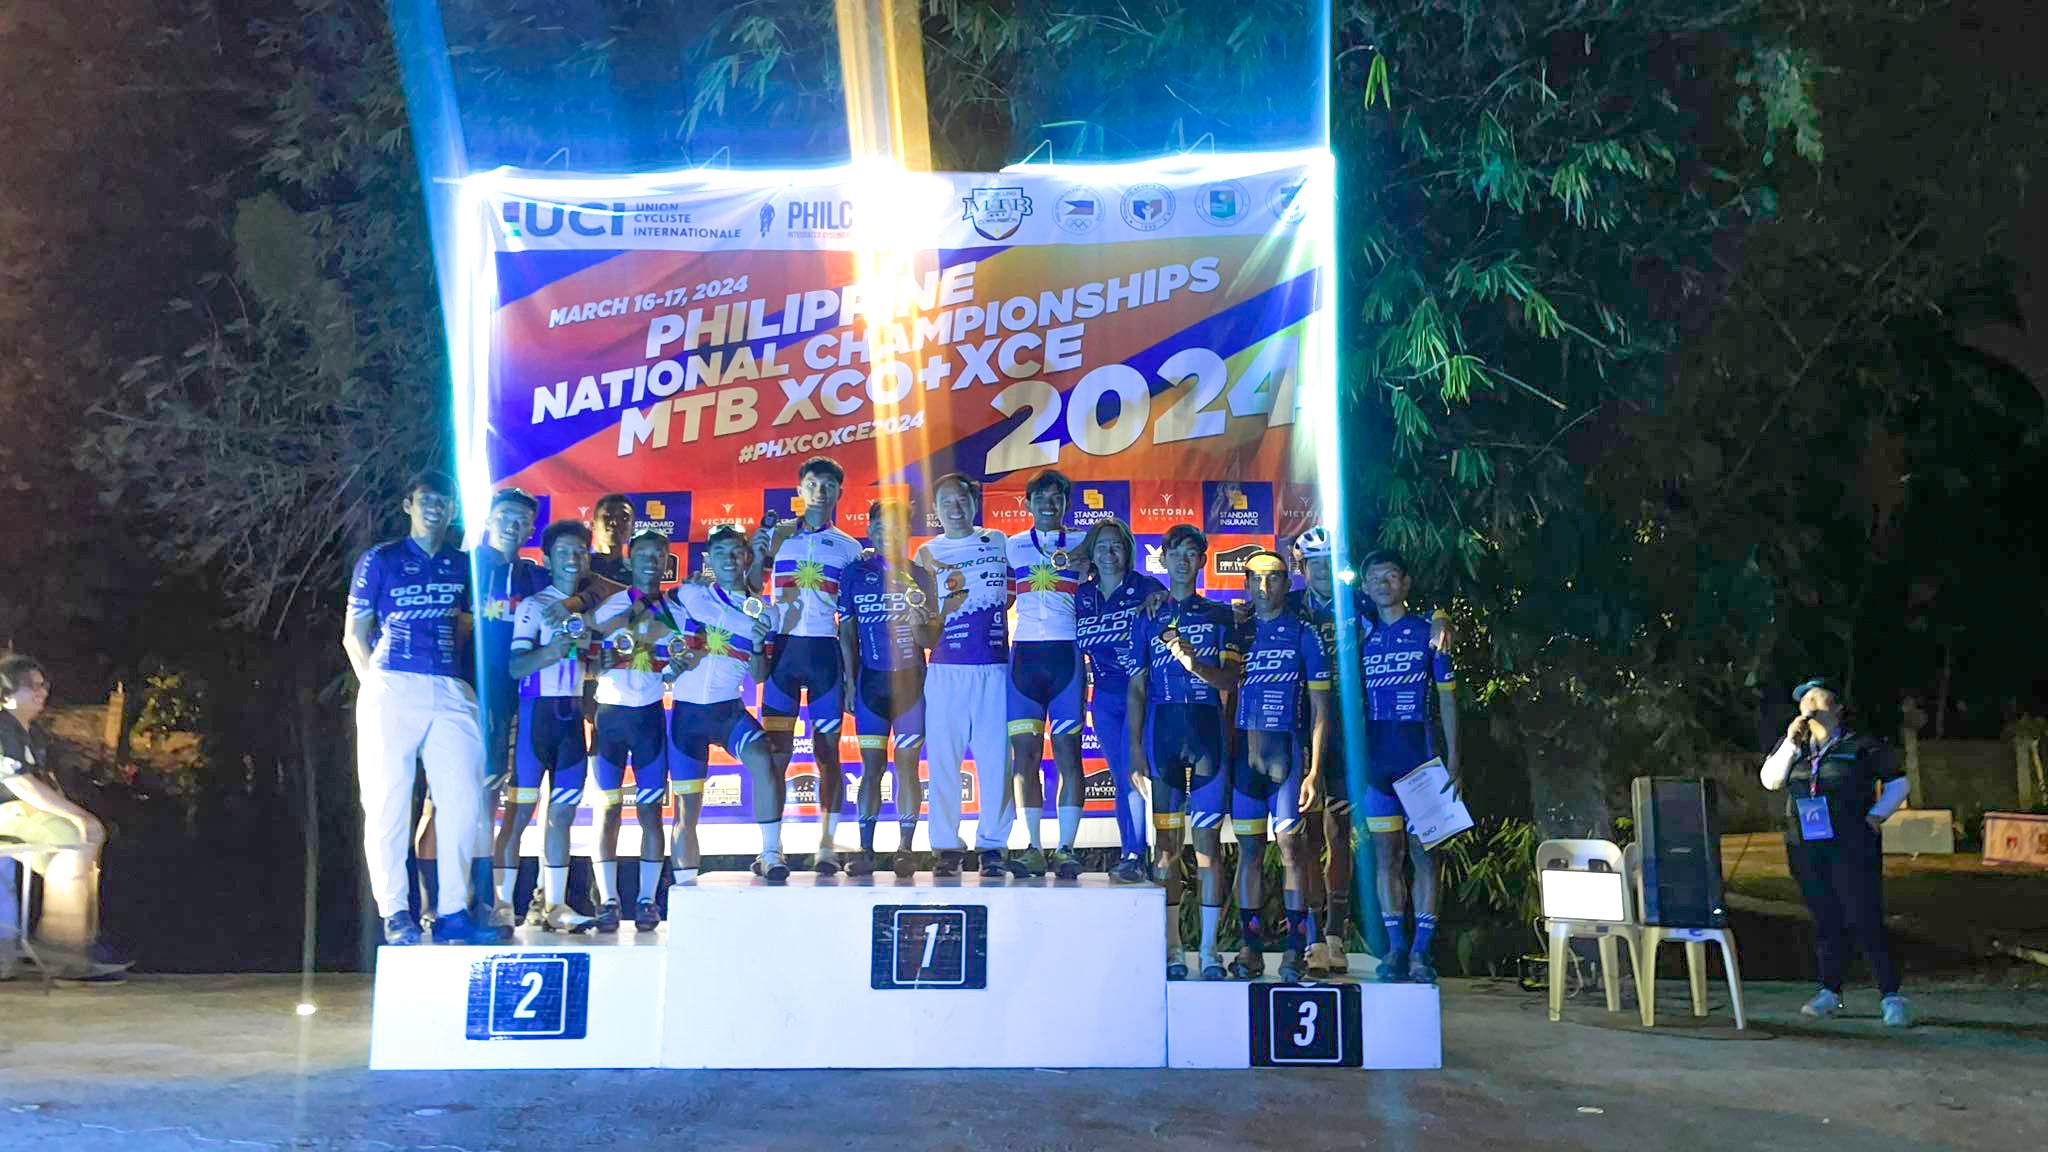 Go for Gold Dominates Philippine National Championship for MTB XCE